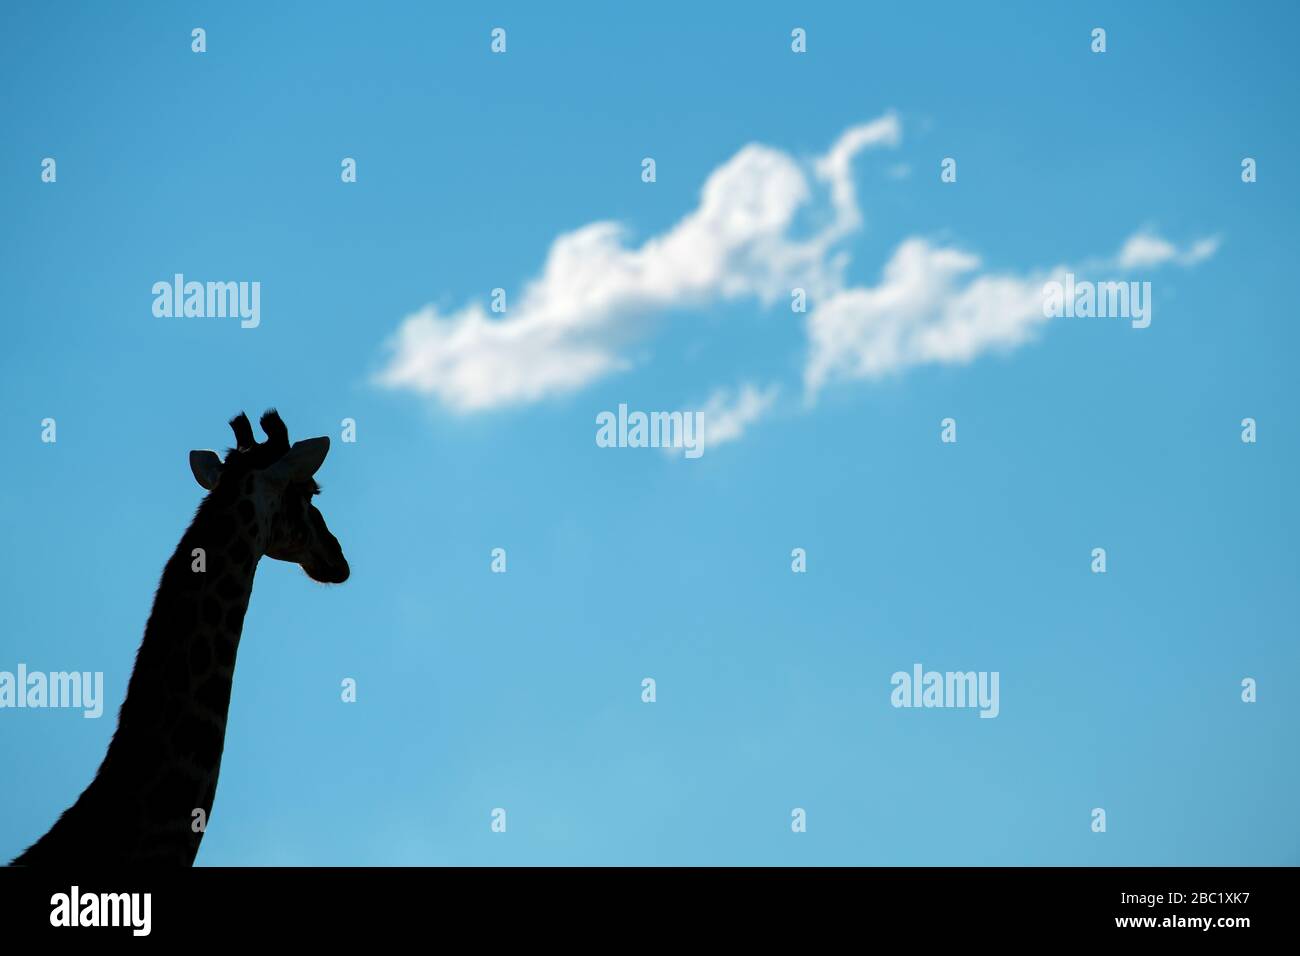 A beautiful abstract photograph of a giraffe head and neck silhouetted against a deep blue sky with white puffy clouds, taken in the Madikwe Game Rese Stock Photo